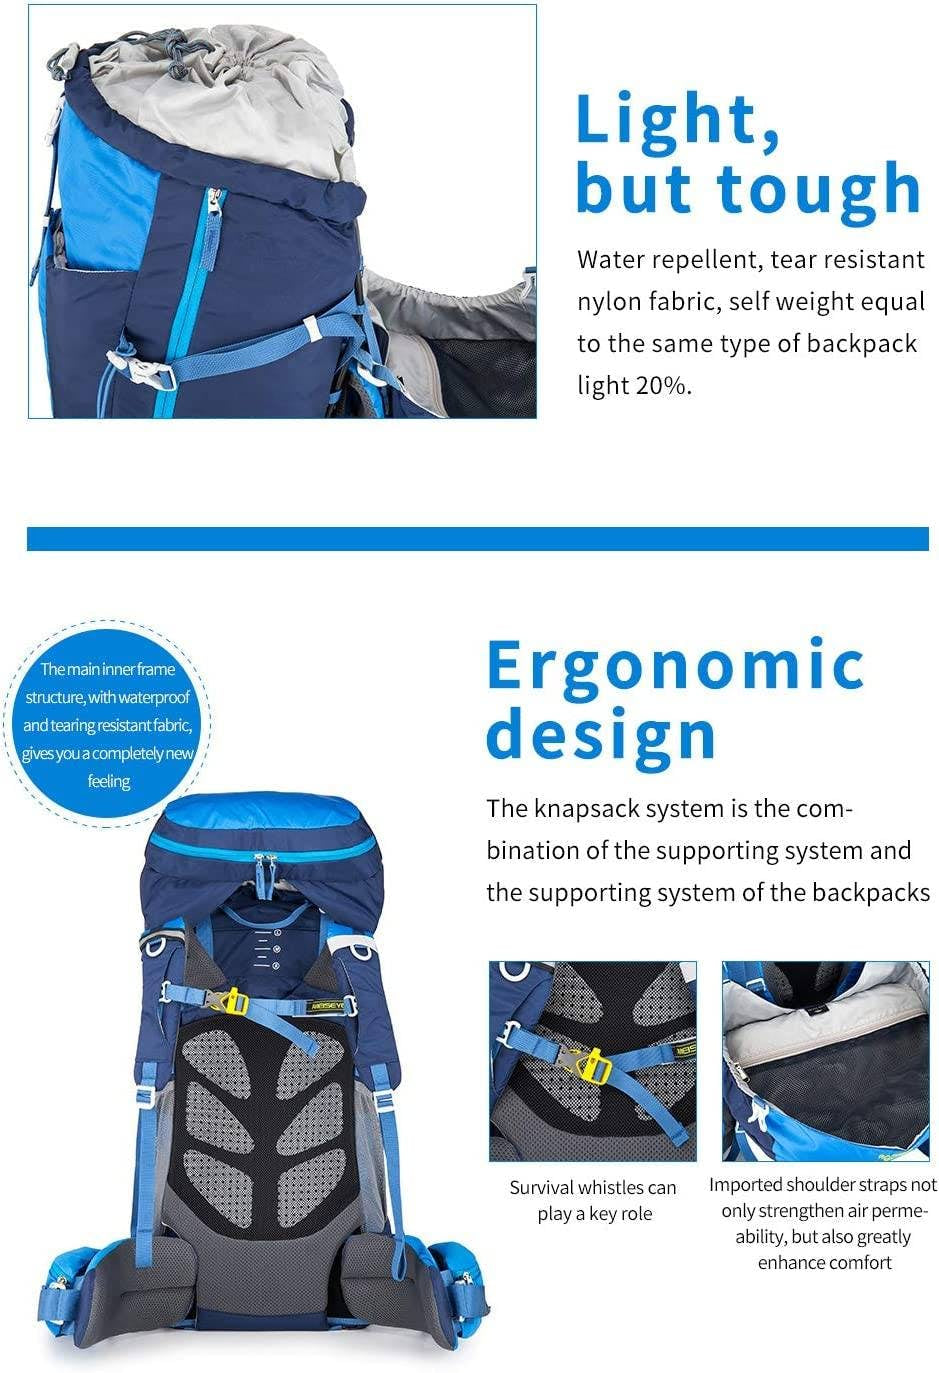 AMEISEYE 65L blue hiking backpack with the internal frame  High-performance backpack for hiking, 65L capacity, blue color  AMEISEYE internal frame backpack, blue, 65 liters. AMEISEYE 65L internal frame backpack in a vibrant blue color, perfect for high-performance outdoor activities like hiking. Blue hiking backpack, 65L, internal frame, AMEISEYE  High-performance backpack, hiking, camping, backpacking, AMEISEYE, 65 liters